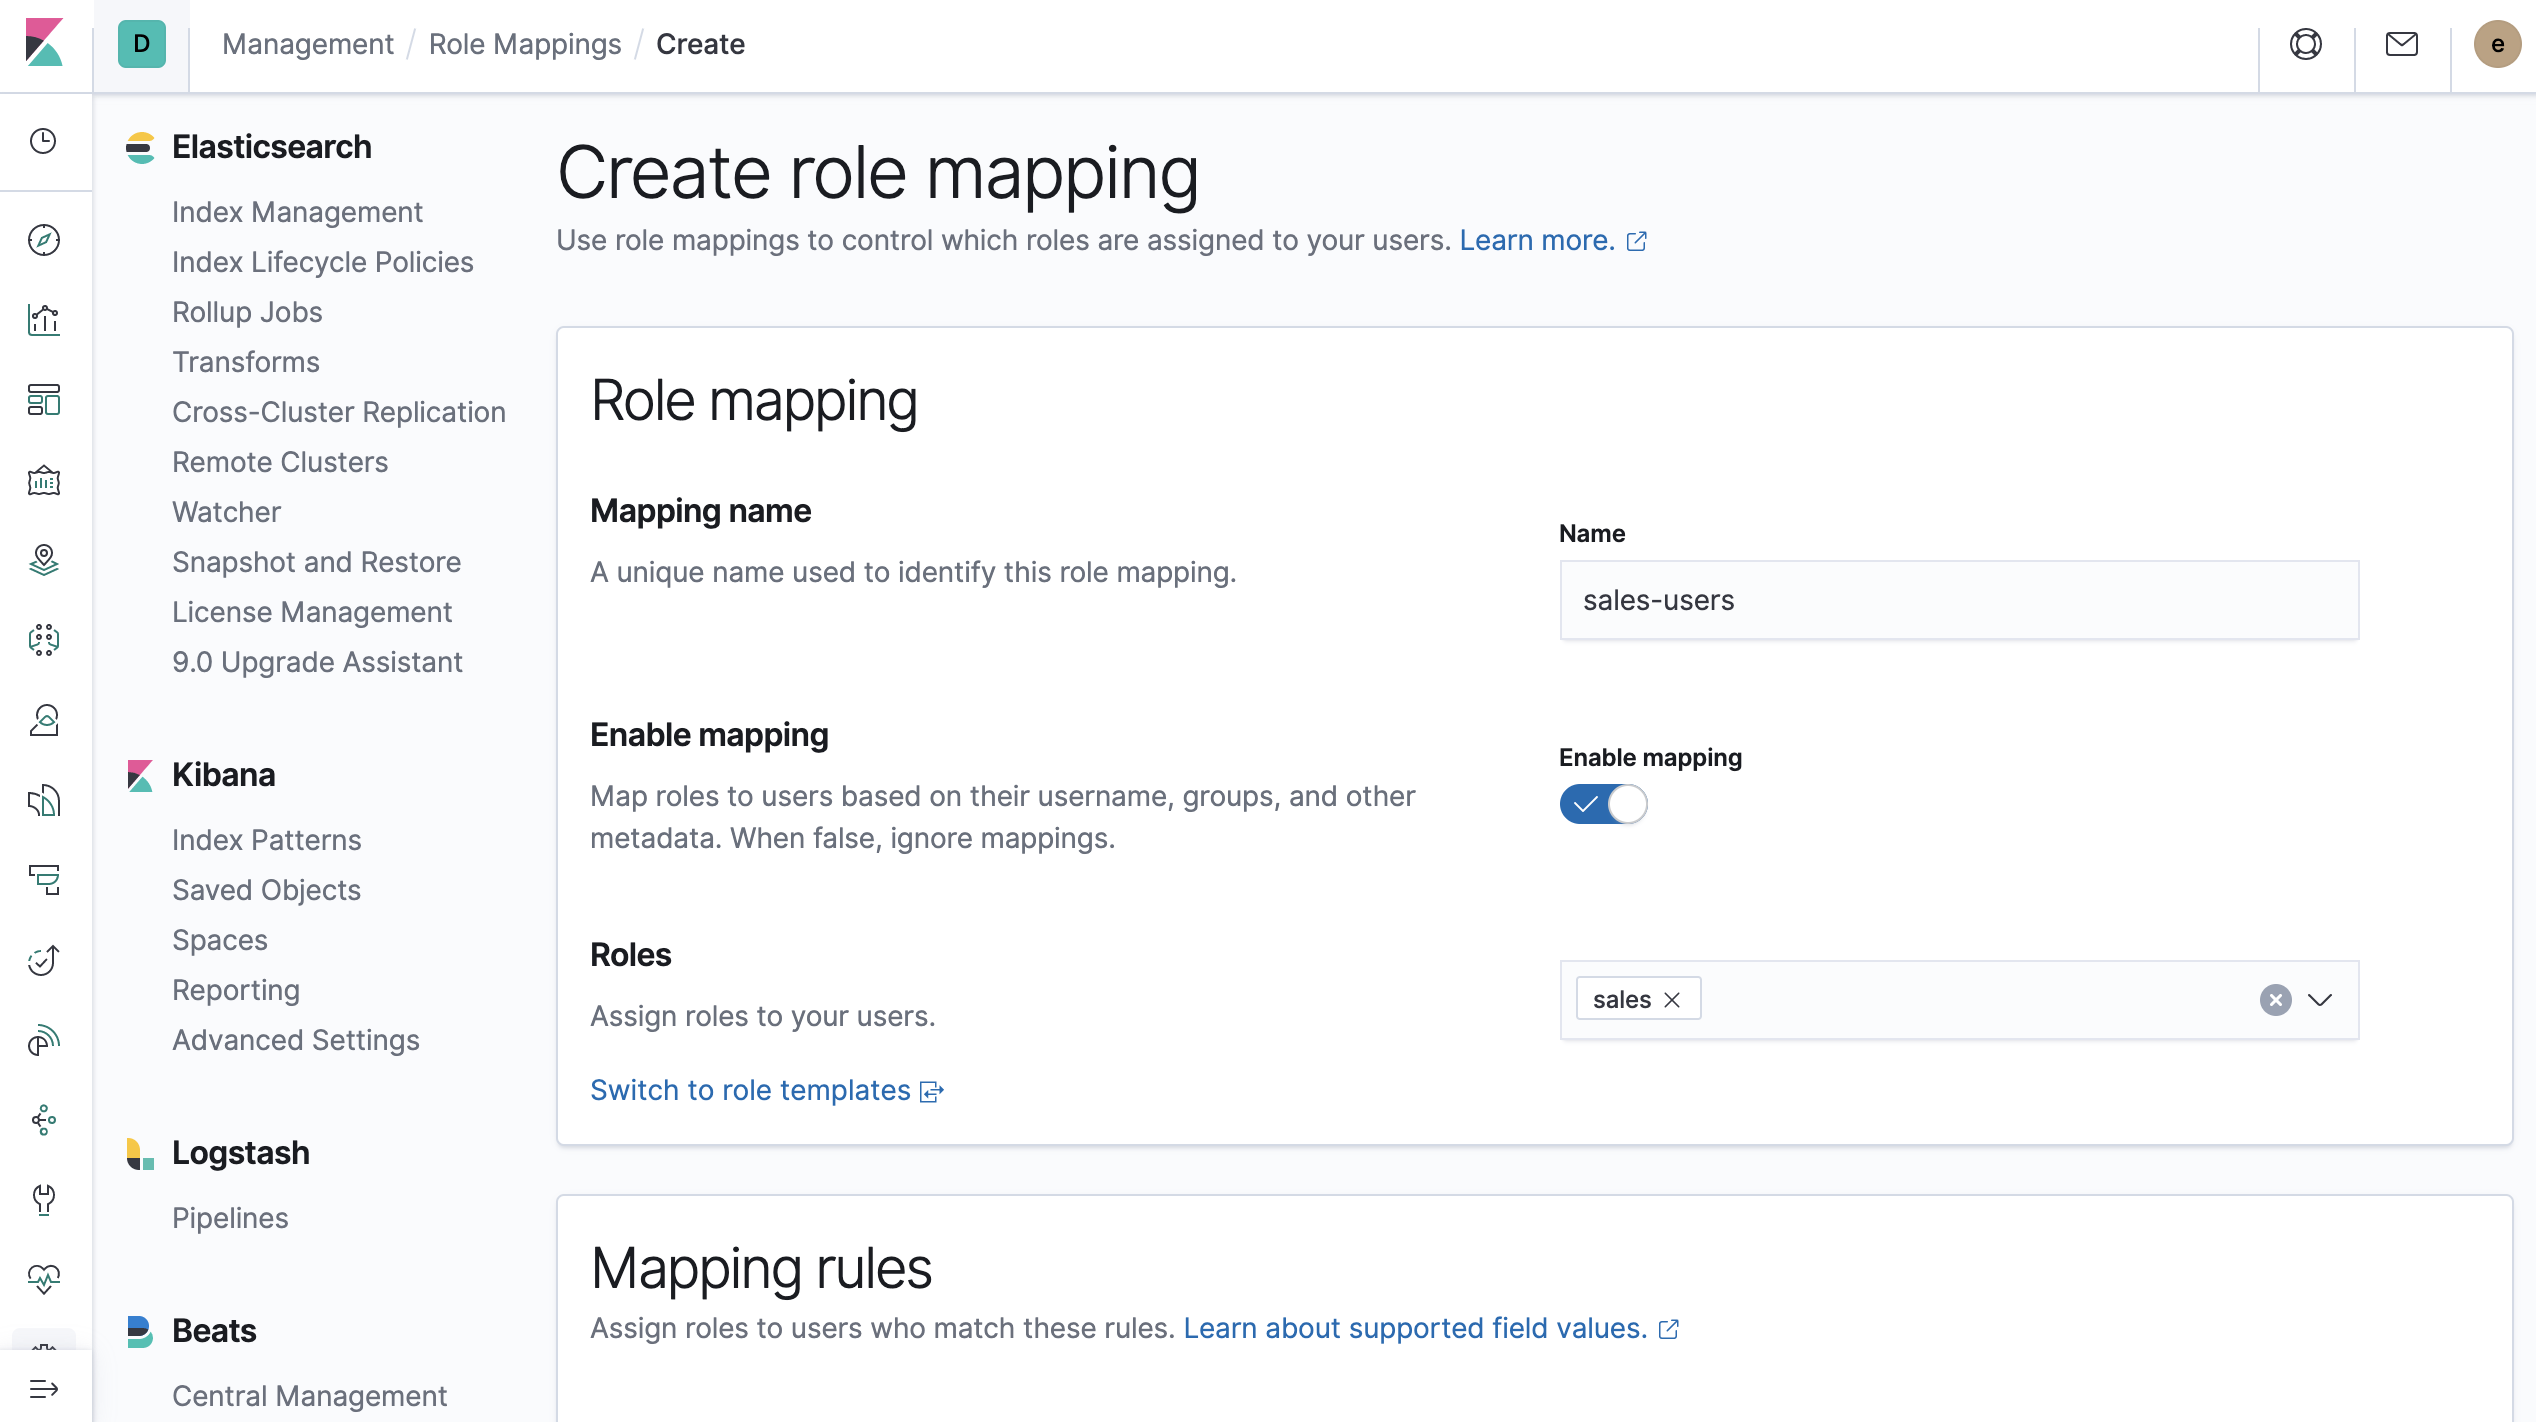 Create role mapping, step 1